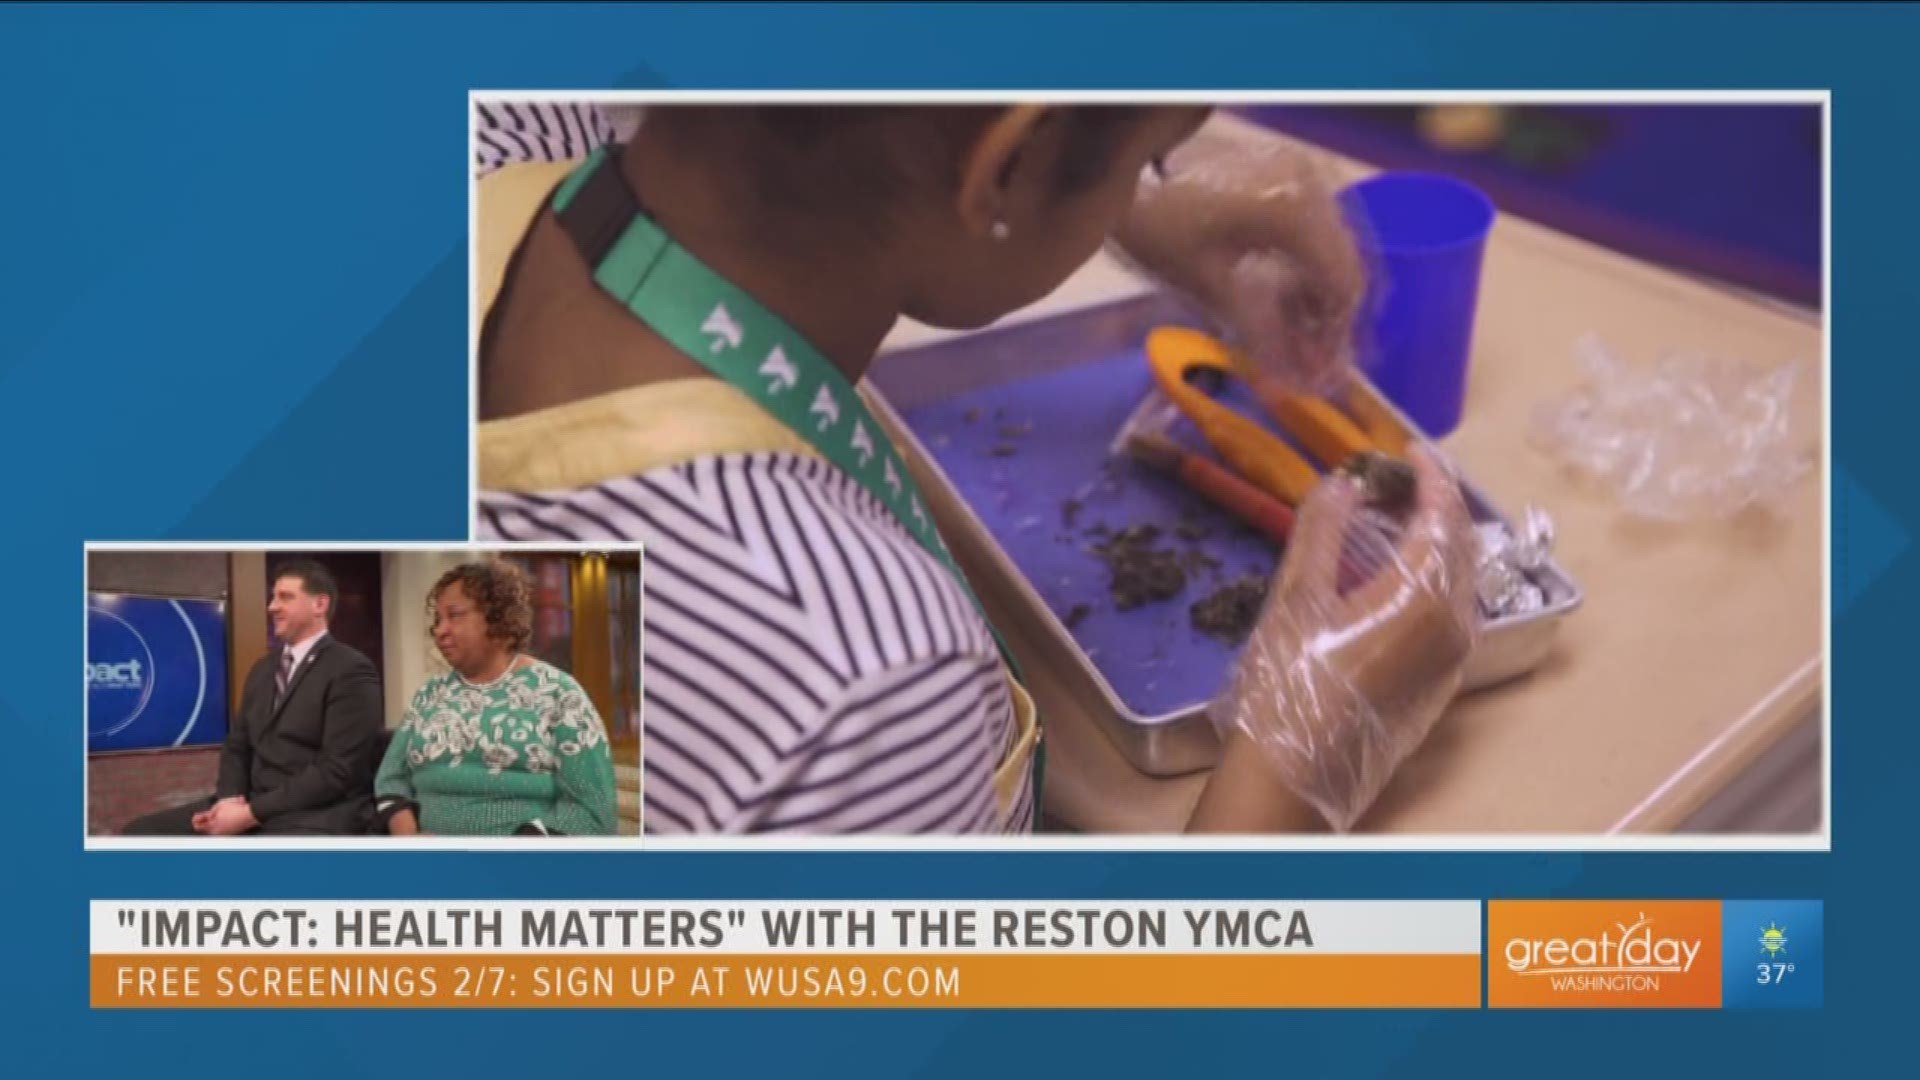 Come meet our WUSA 9 team on February 7th for our Impact: Health Matters event with the Reston YMCA and Reston Hospital Center. All who attend will receive free health screenings as well as a chance to enjoy free fitness and cooking classes. Make sure to register at wusa9.com/healthmatters.